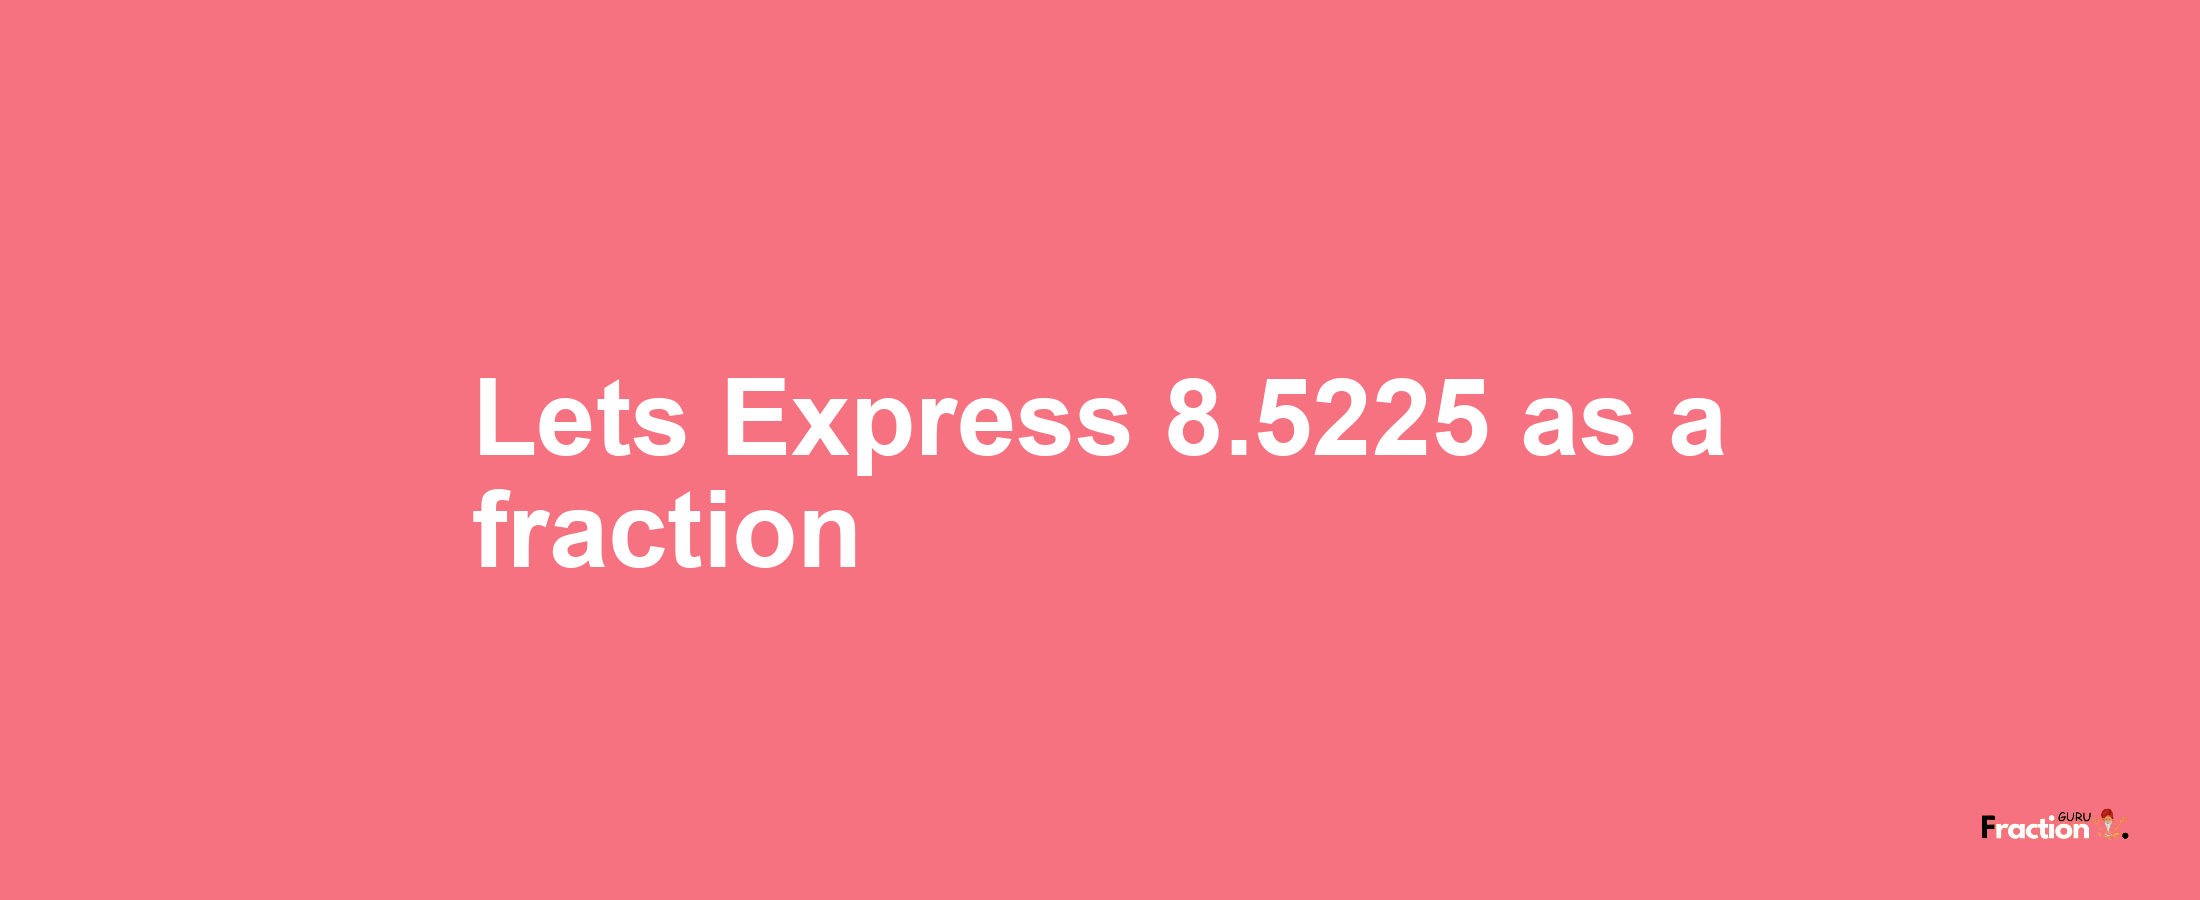 Lets Express 8.5225 as afraction